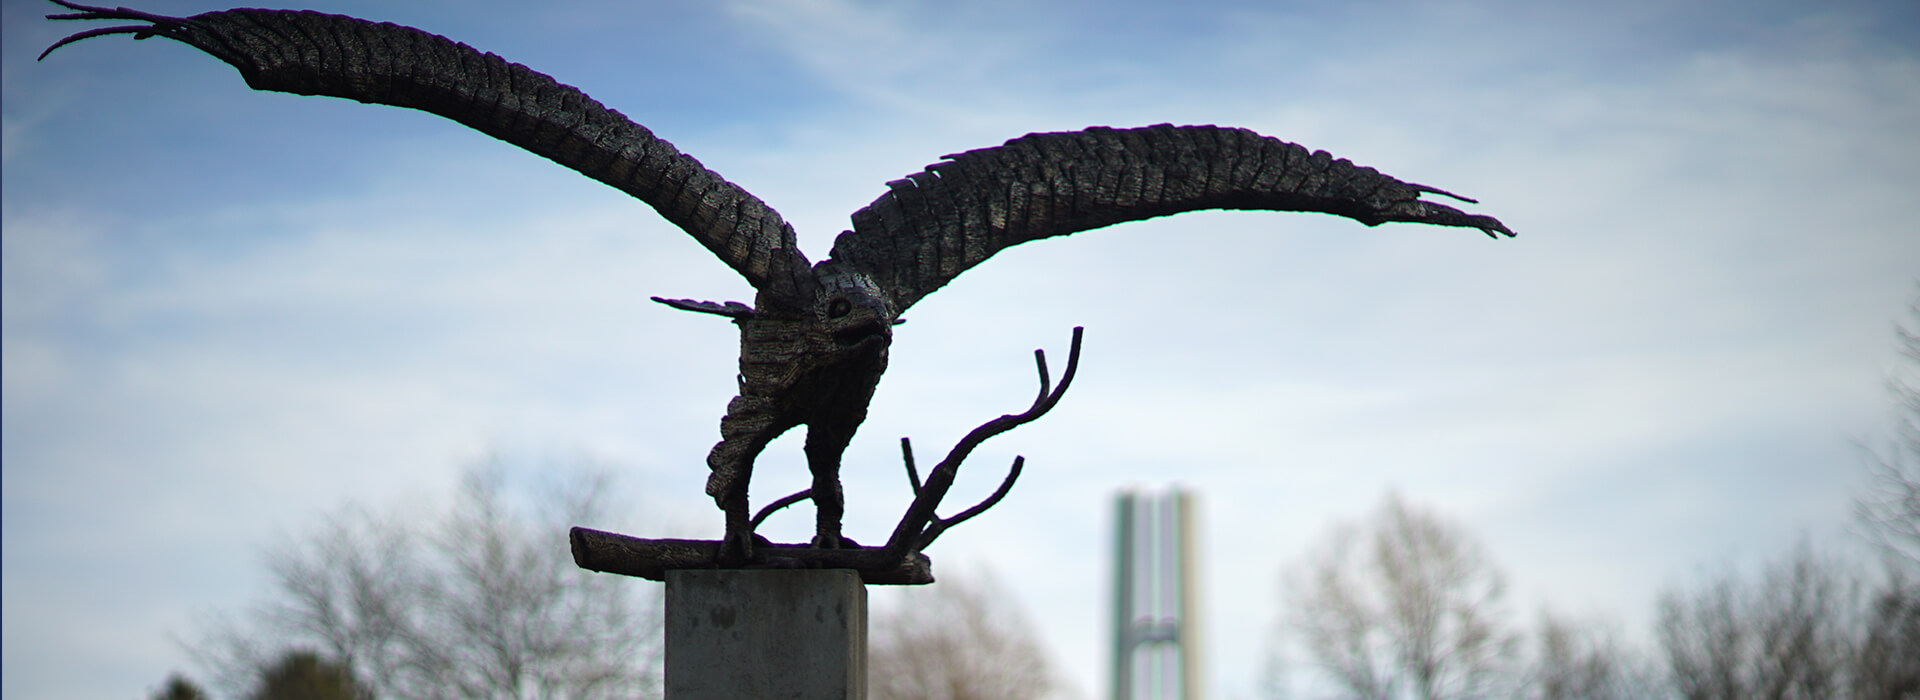 Golden Eagle Statue with gray sky and leafless trees in the background with the bell tower peaking out in the back